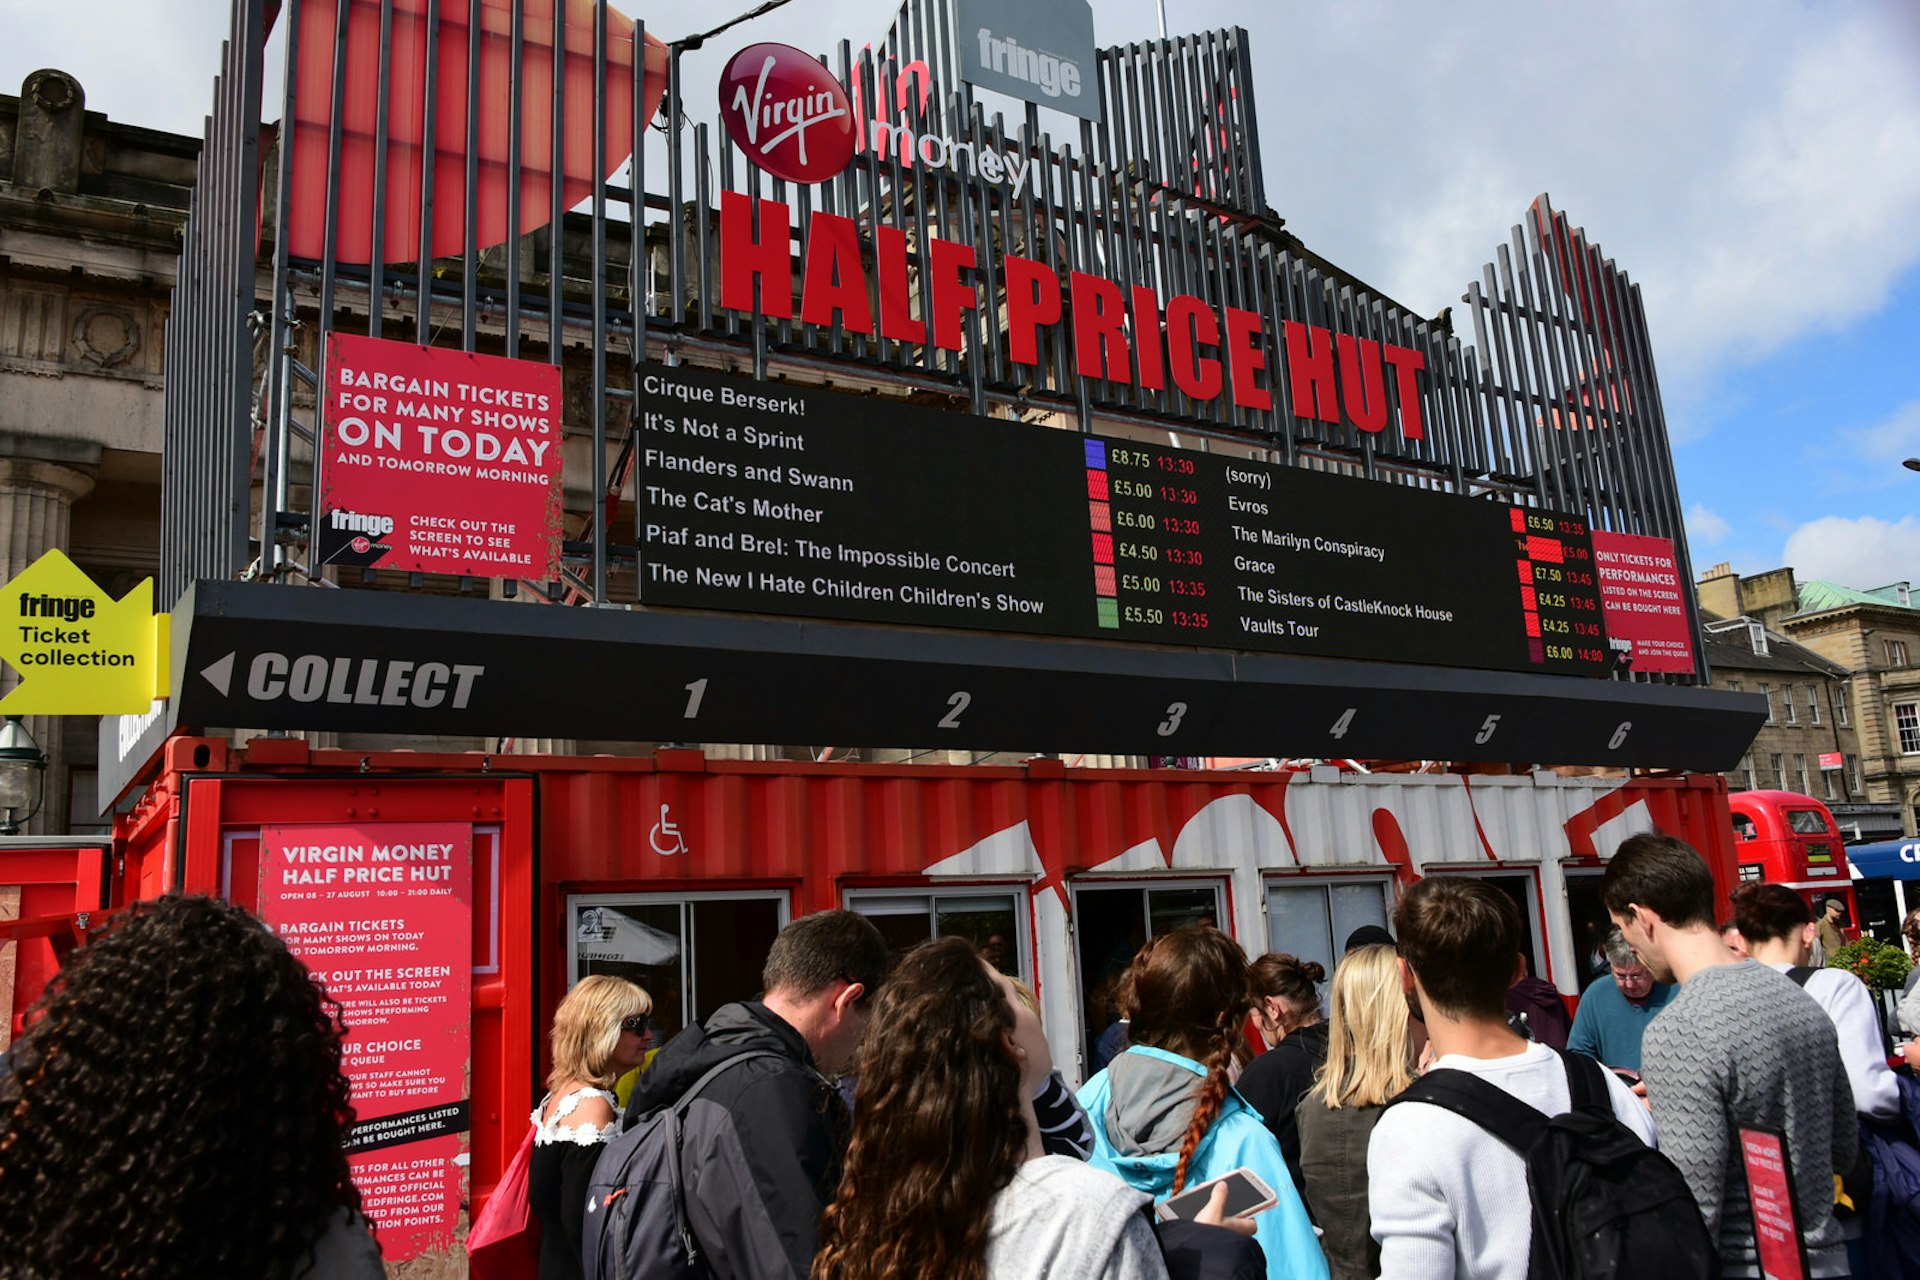 Festival-goers on The Mound precinct queue outside the "Half Price Hut" ticket office during the Edinburgh Festival Fringe. The office is in a shipping container painted red and white with windows to serve customers through. 